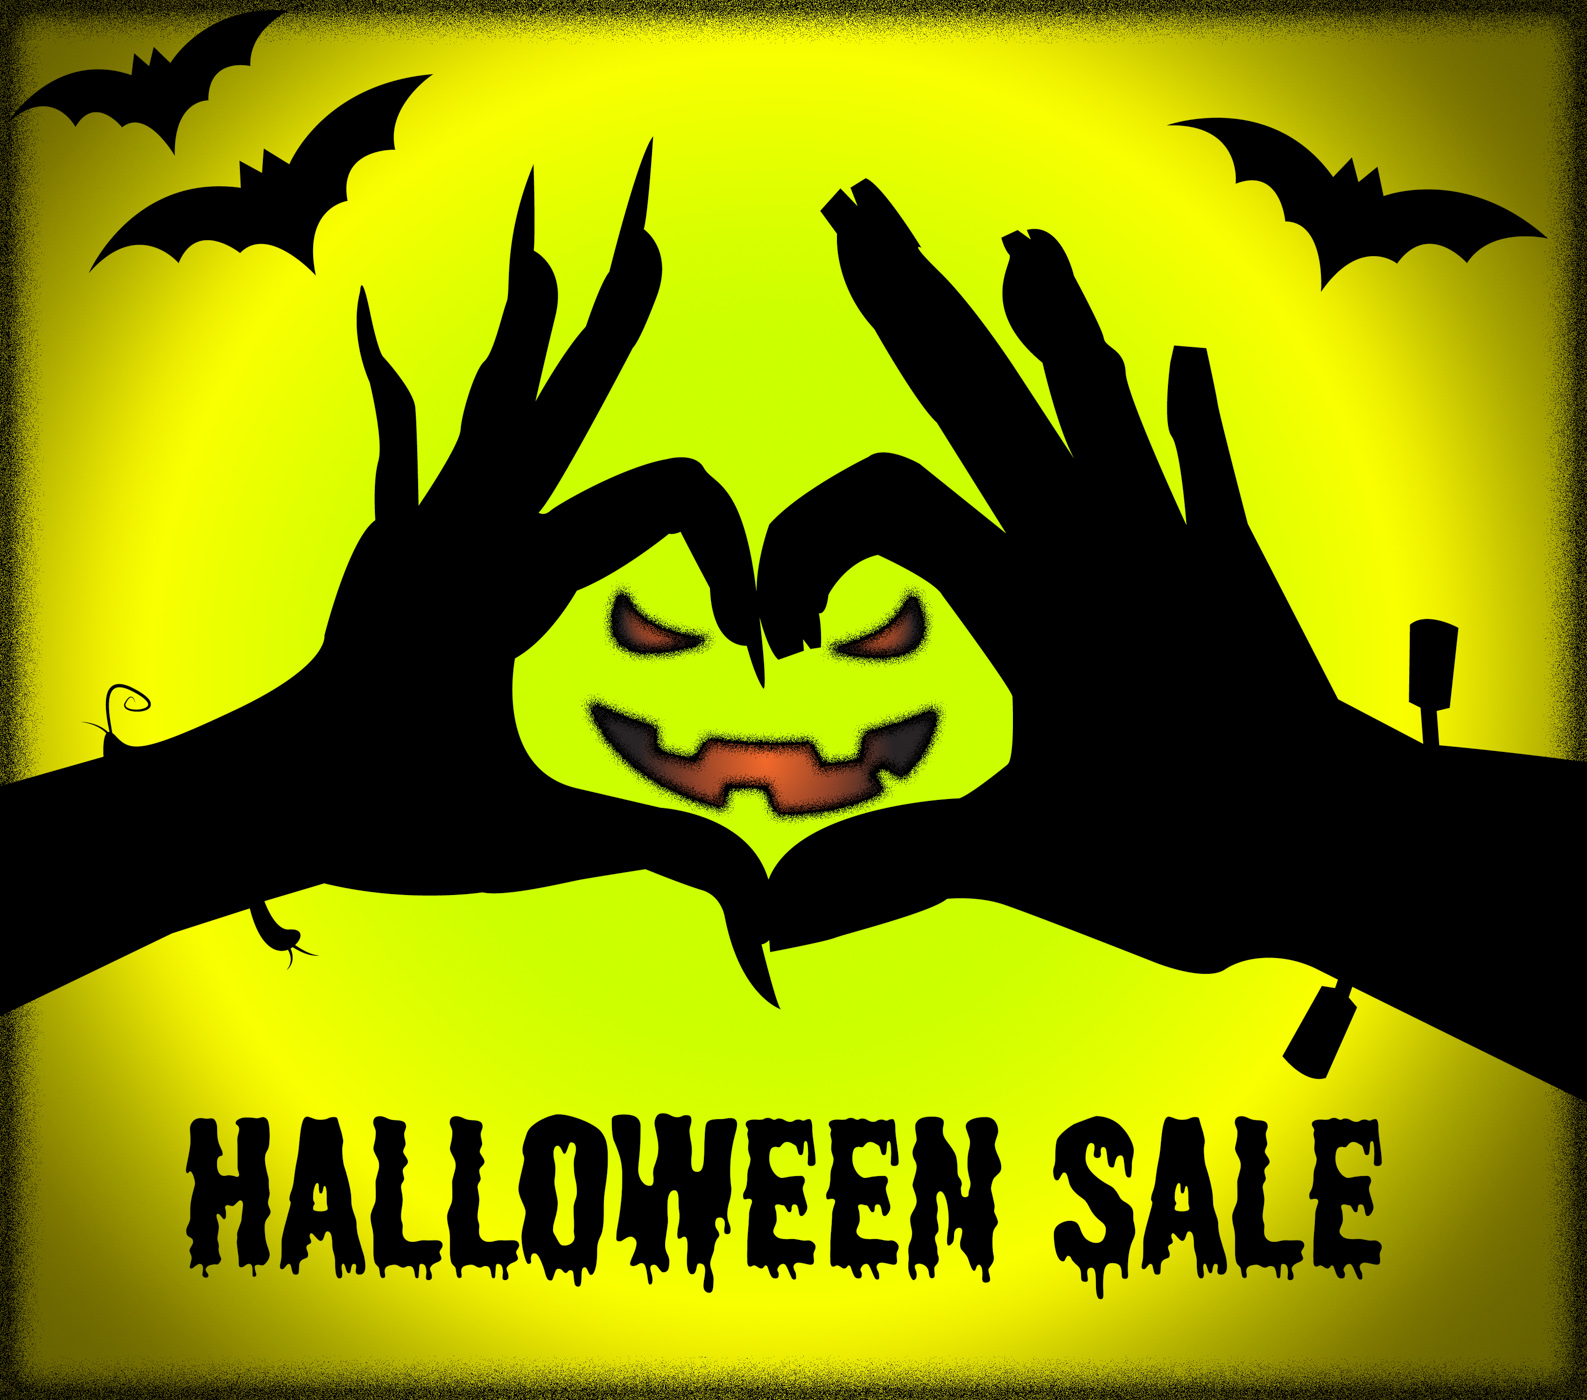 Halloween sale represents trick or treat and celebration photo